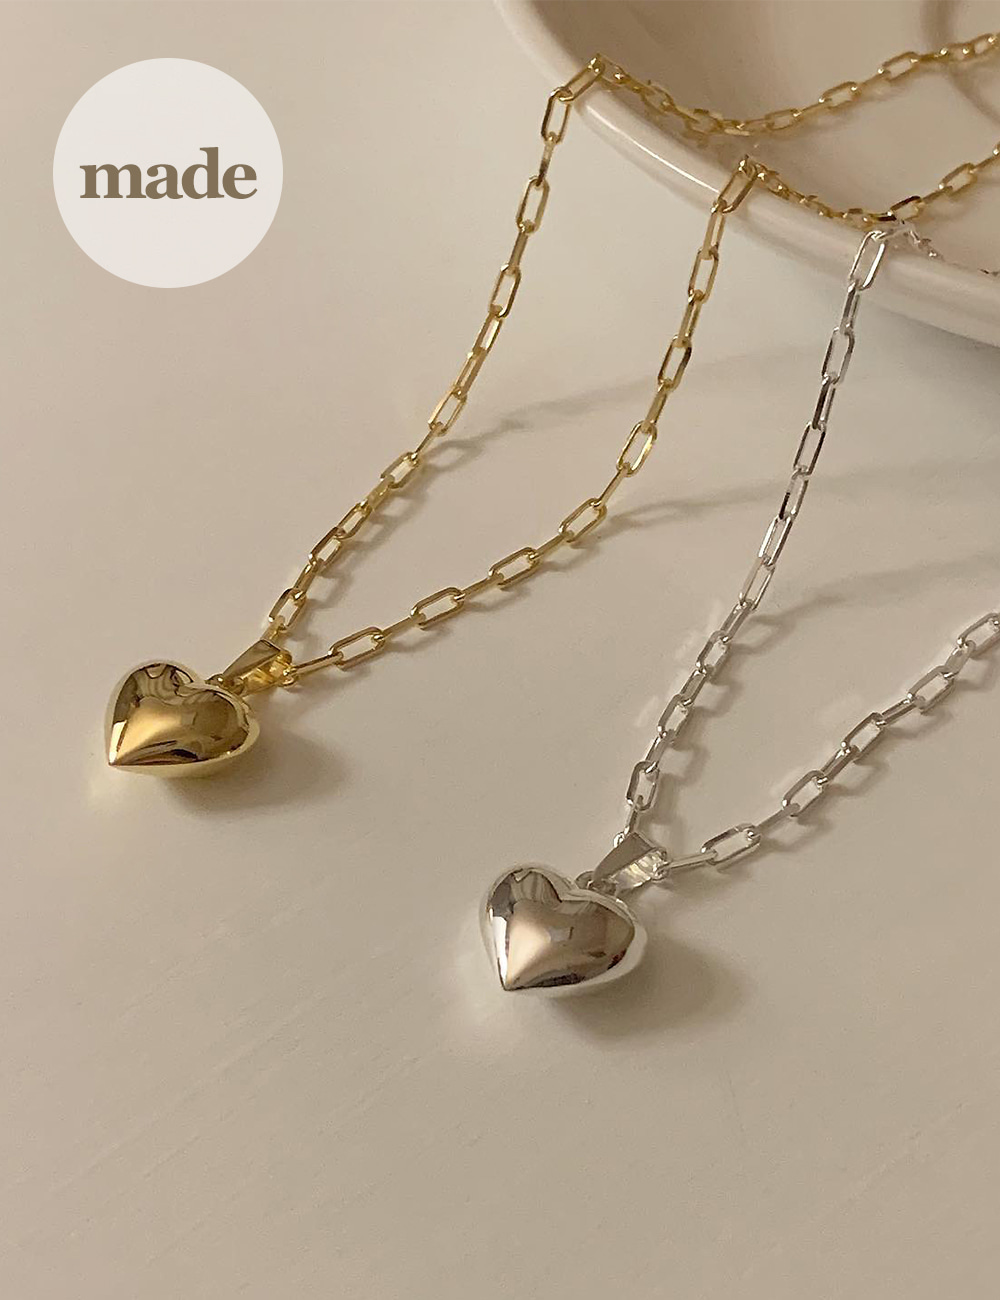 (silver 92.5) Heart chain necklace / gleamme made